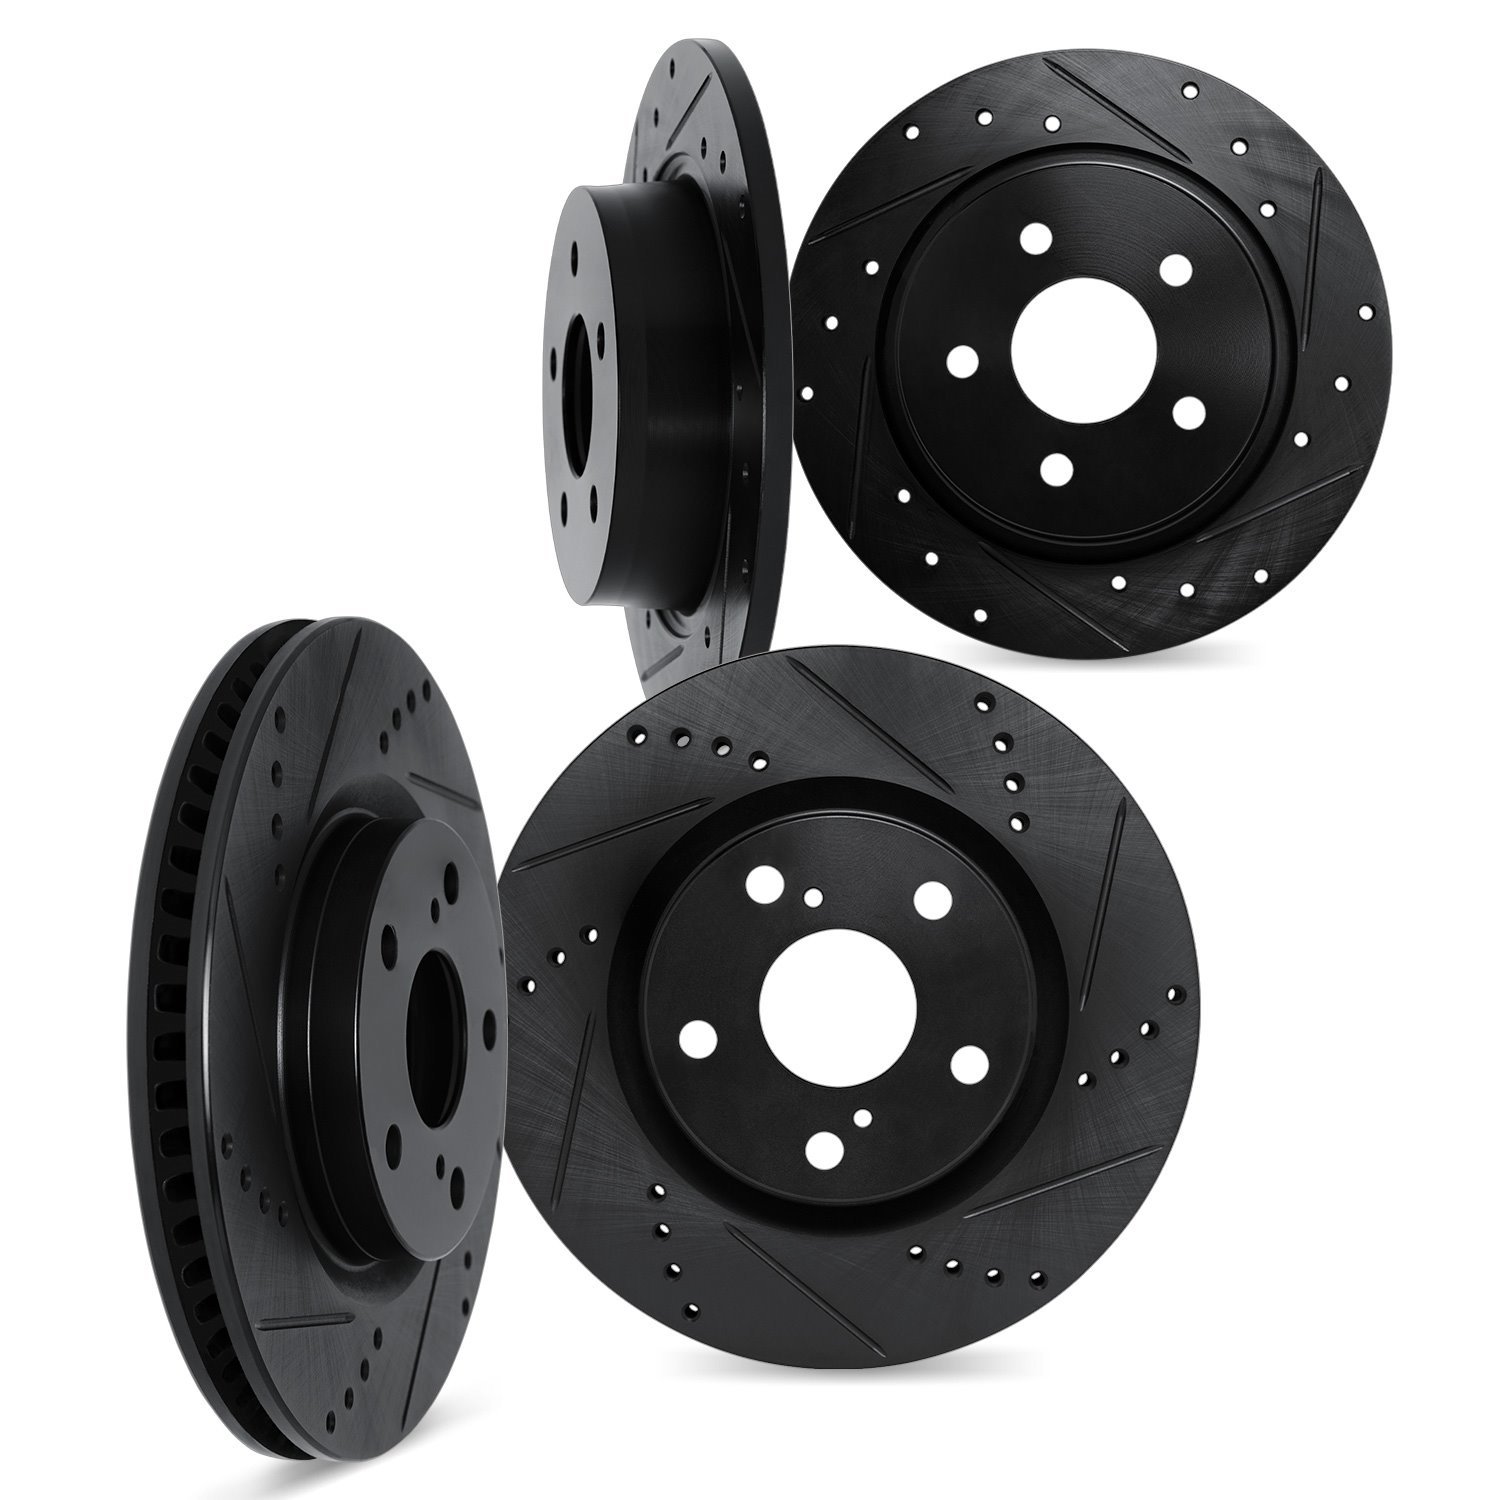 8004-73071 Drilled/Slotted Brake Rotors [Black], Fits Select Audi/Volkswagen, Position: Front and Rear